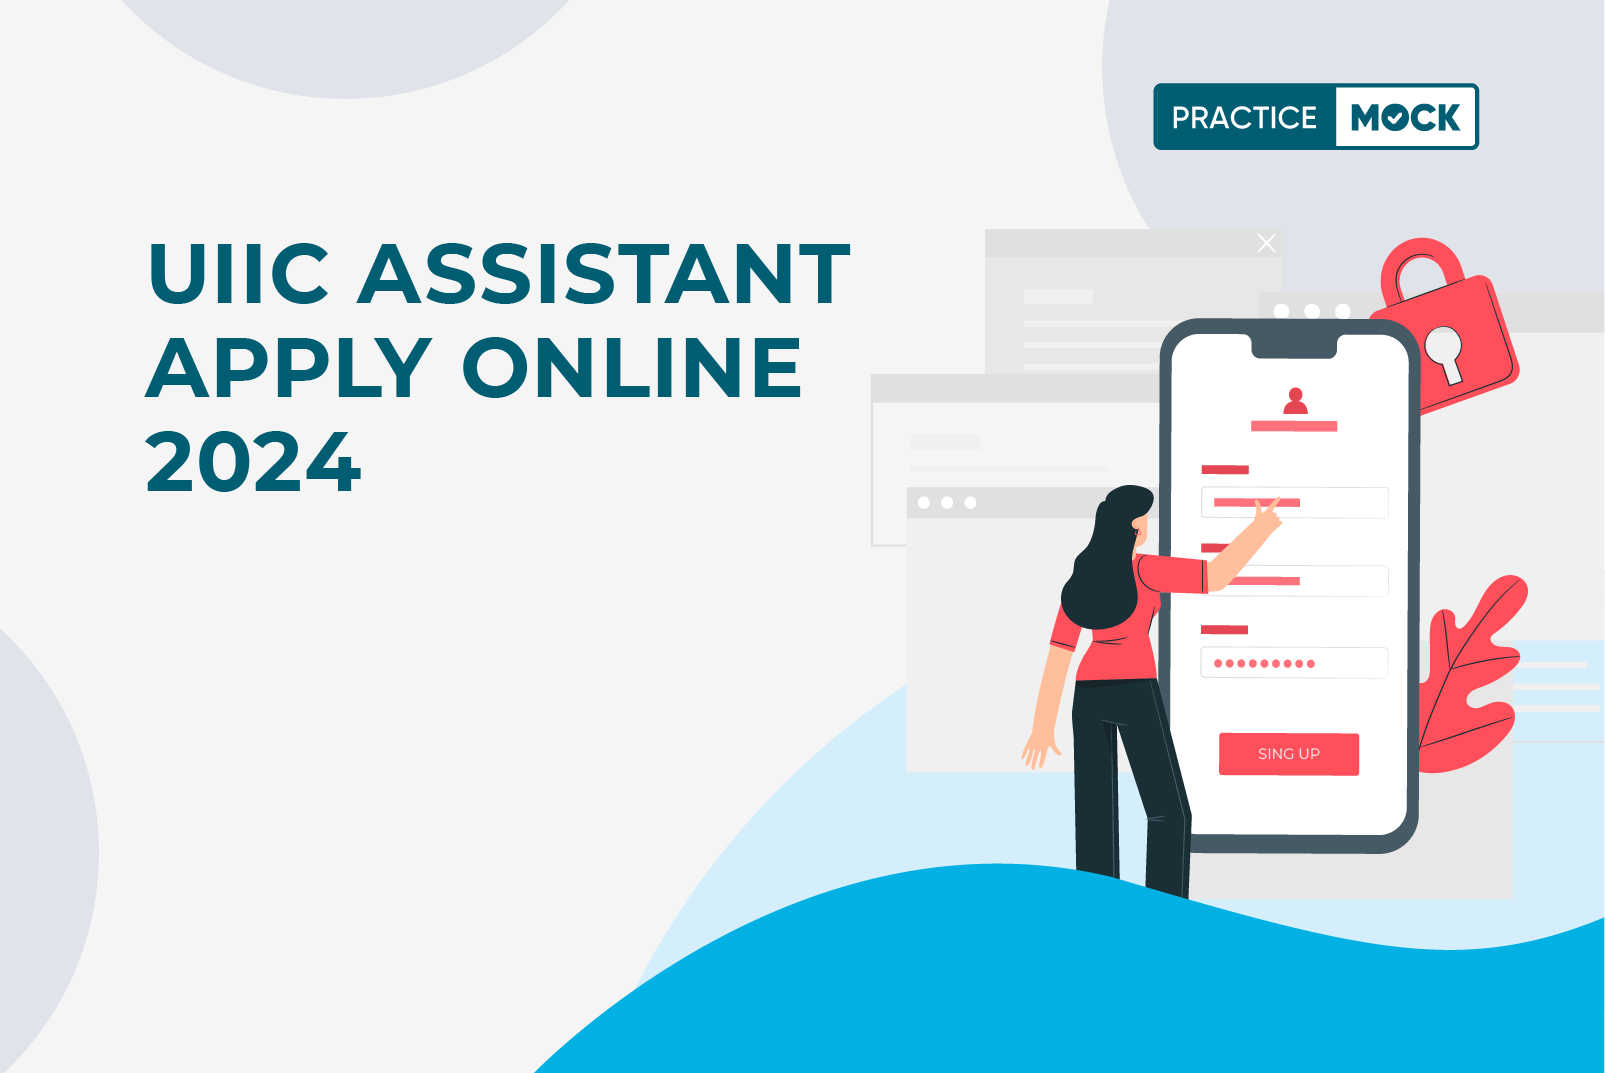 UIIC Assistant Apply Online 2024